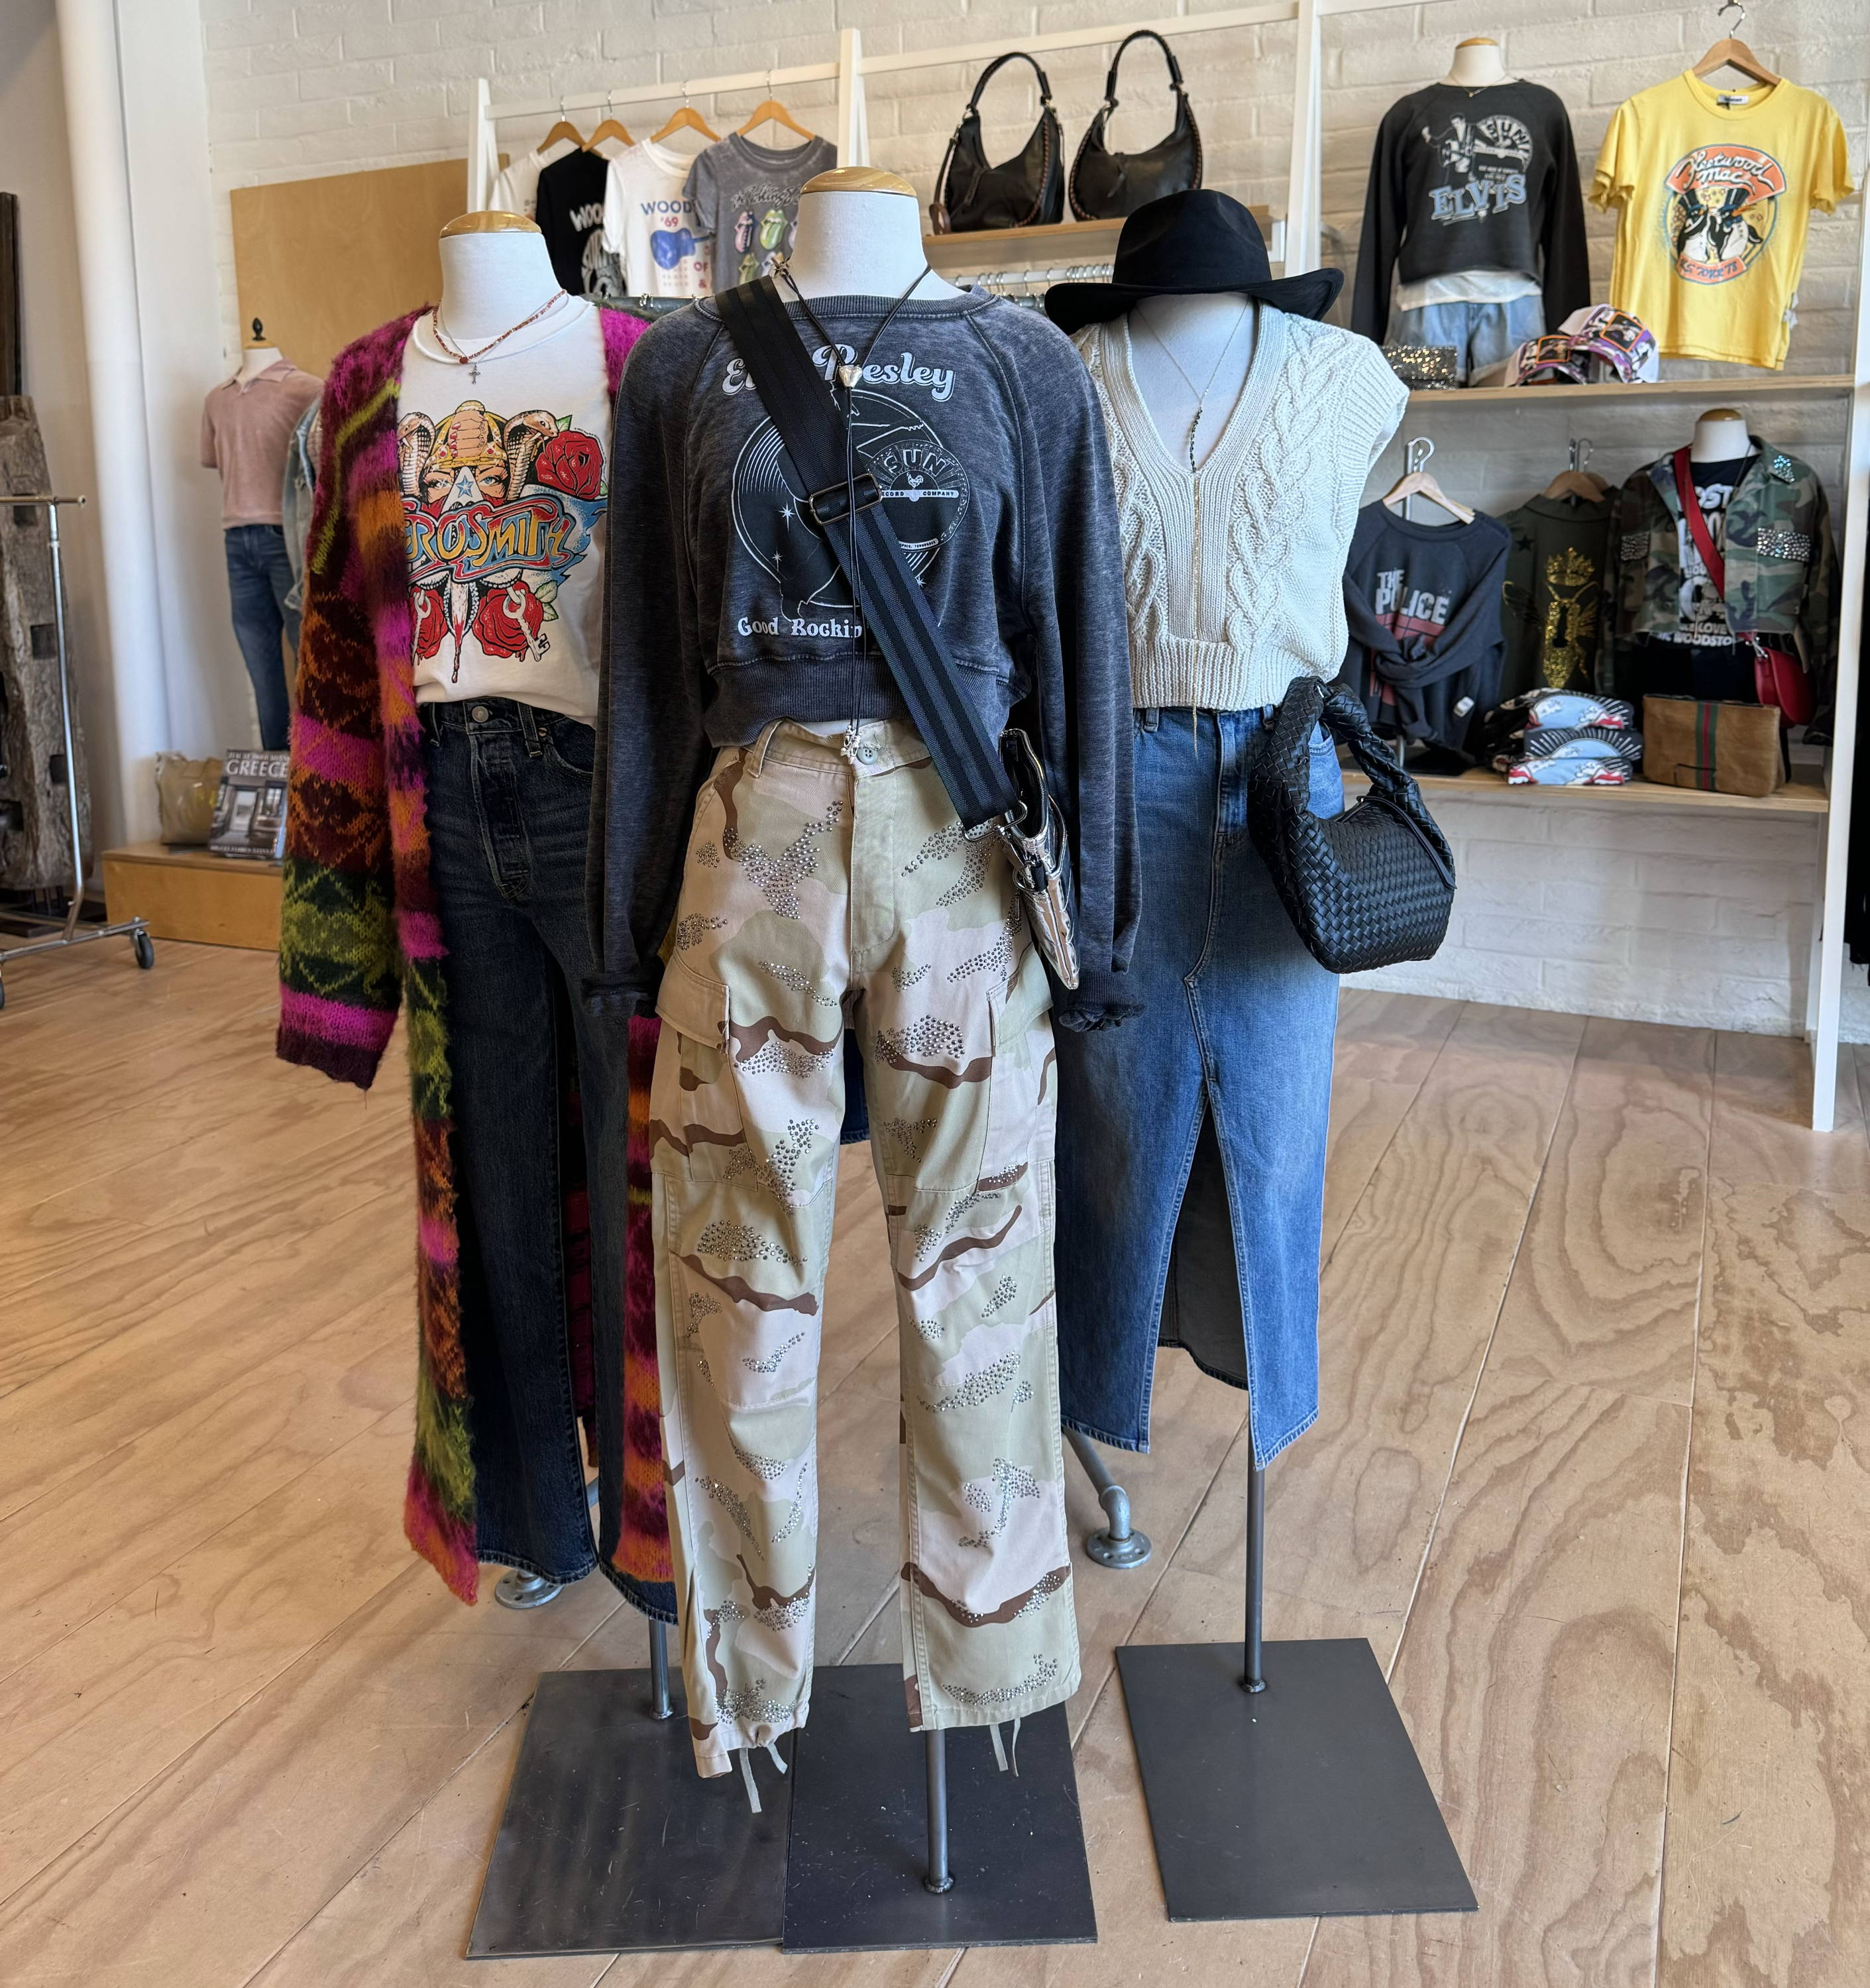 Display of various clothing items.